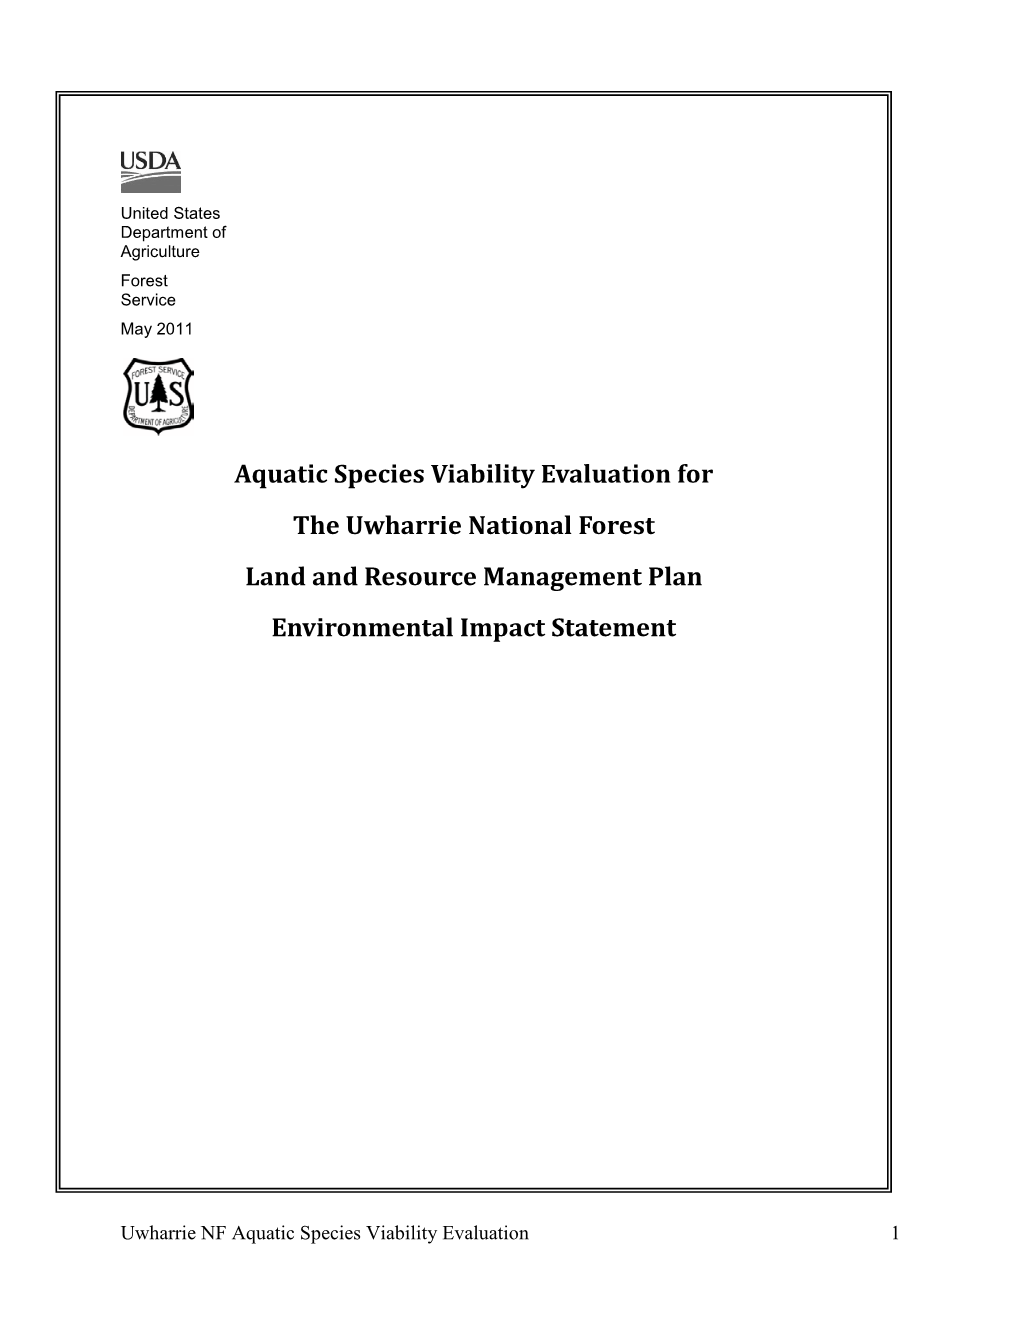 Aquatic Species Viability Evaluation for the Uwharrie National Forest Land and Resource Management Plan Environmental Impact Statement